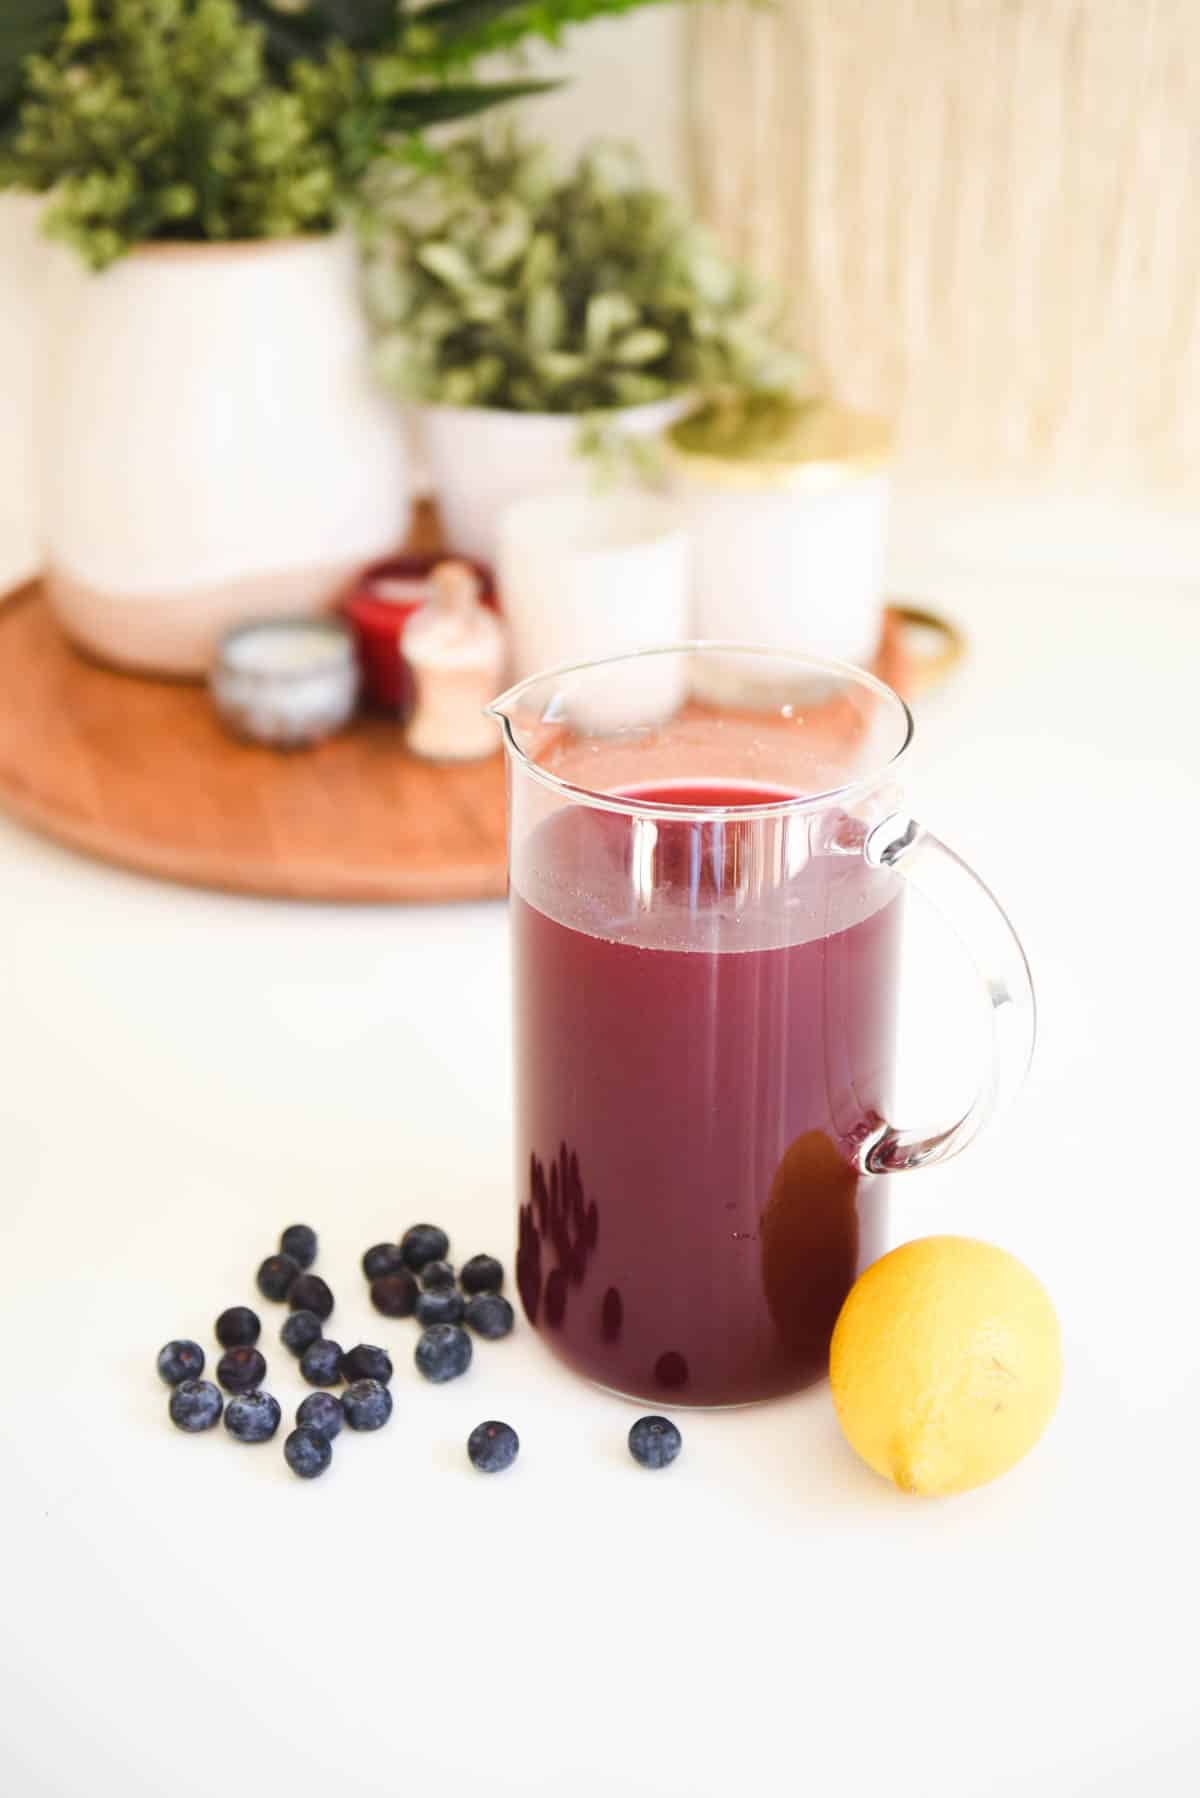 Fresh blueberries and a whole lemon on a table next to a pitcher of Blueberry Lemonade.